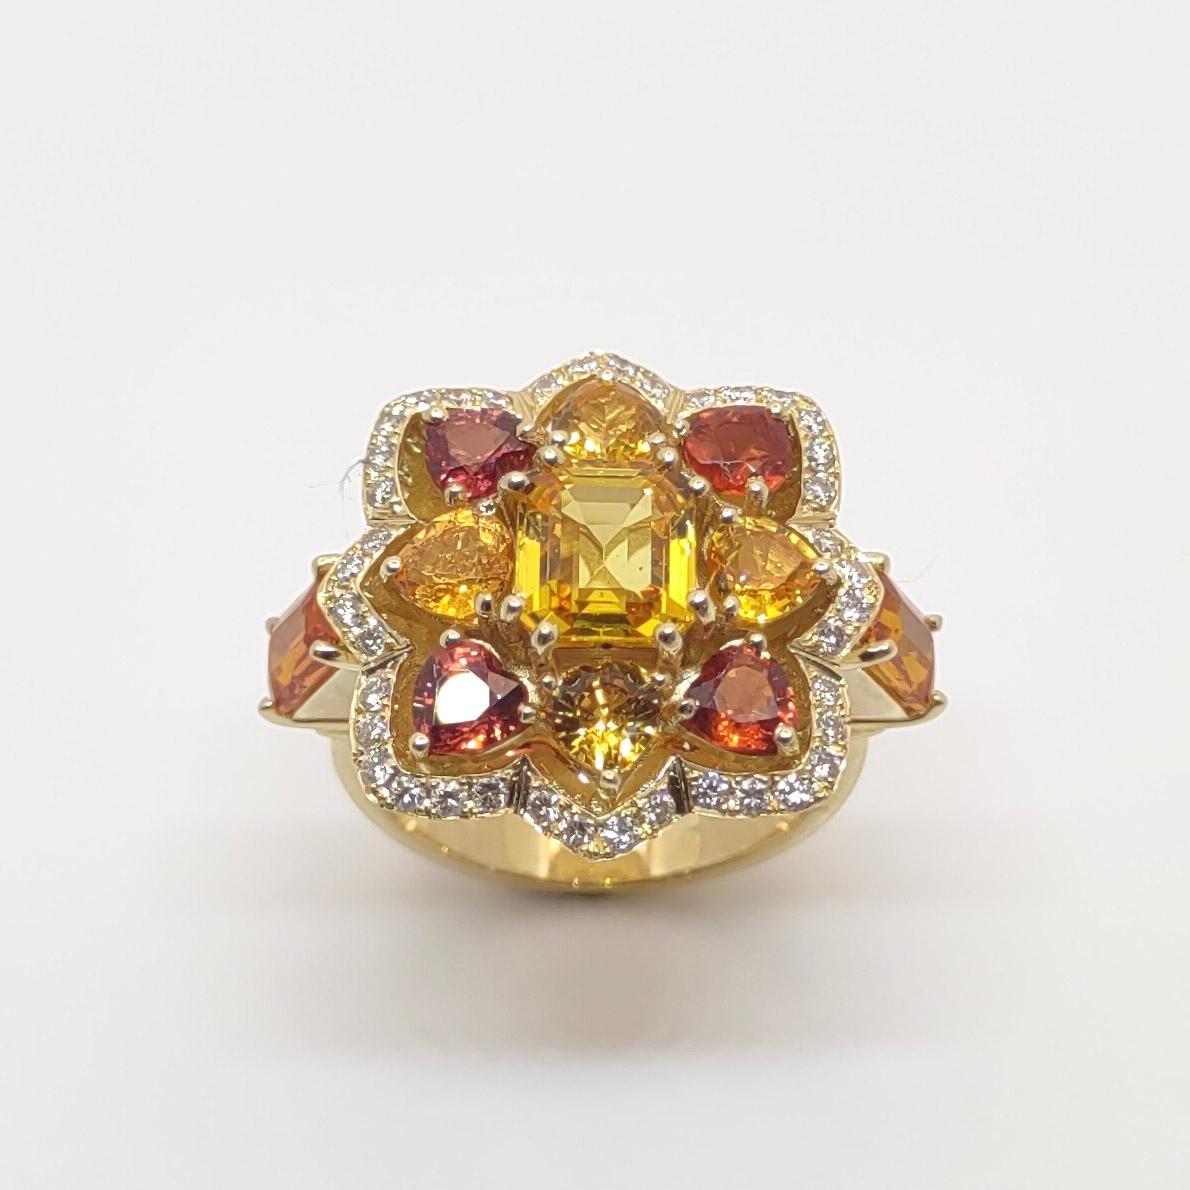 Presenting S.Georgios designer Ring all hand-made in 18 Karat Yellow Gold. This stunning ring features Multicolor Yellow and Orange Sapphires with a total weight of 5.51 Carats. The center baguette-cut yellow sapphire is surrounded by heart-shaped